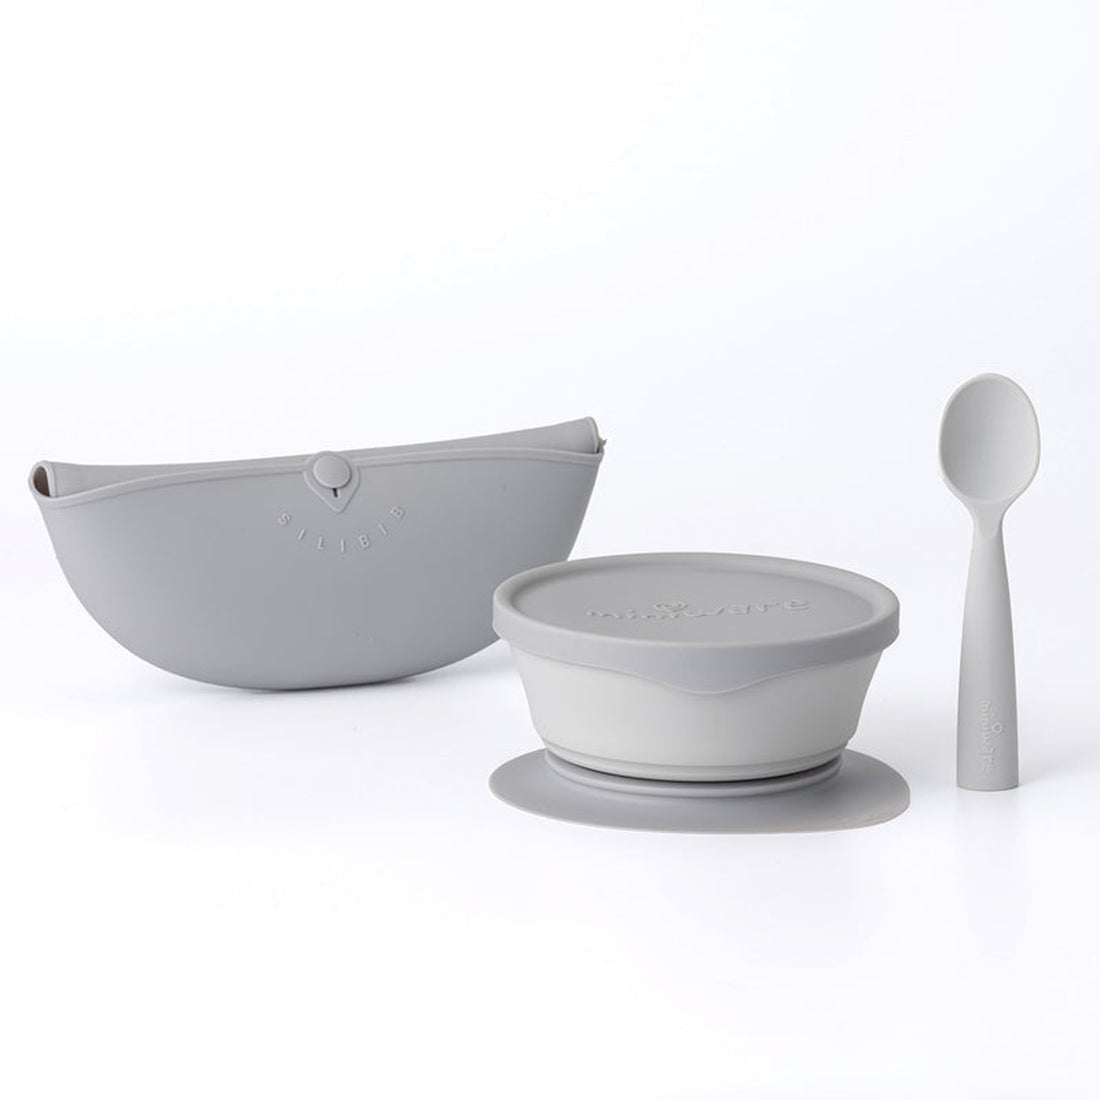 miniware-first-bite-deluxe-set-silicone-bib-cereal-bowl-silicone-lid-training-spoon-detachable-suction-foot-in-grey-mnwr-mwfbdgg- (1)